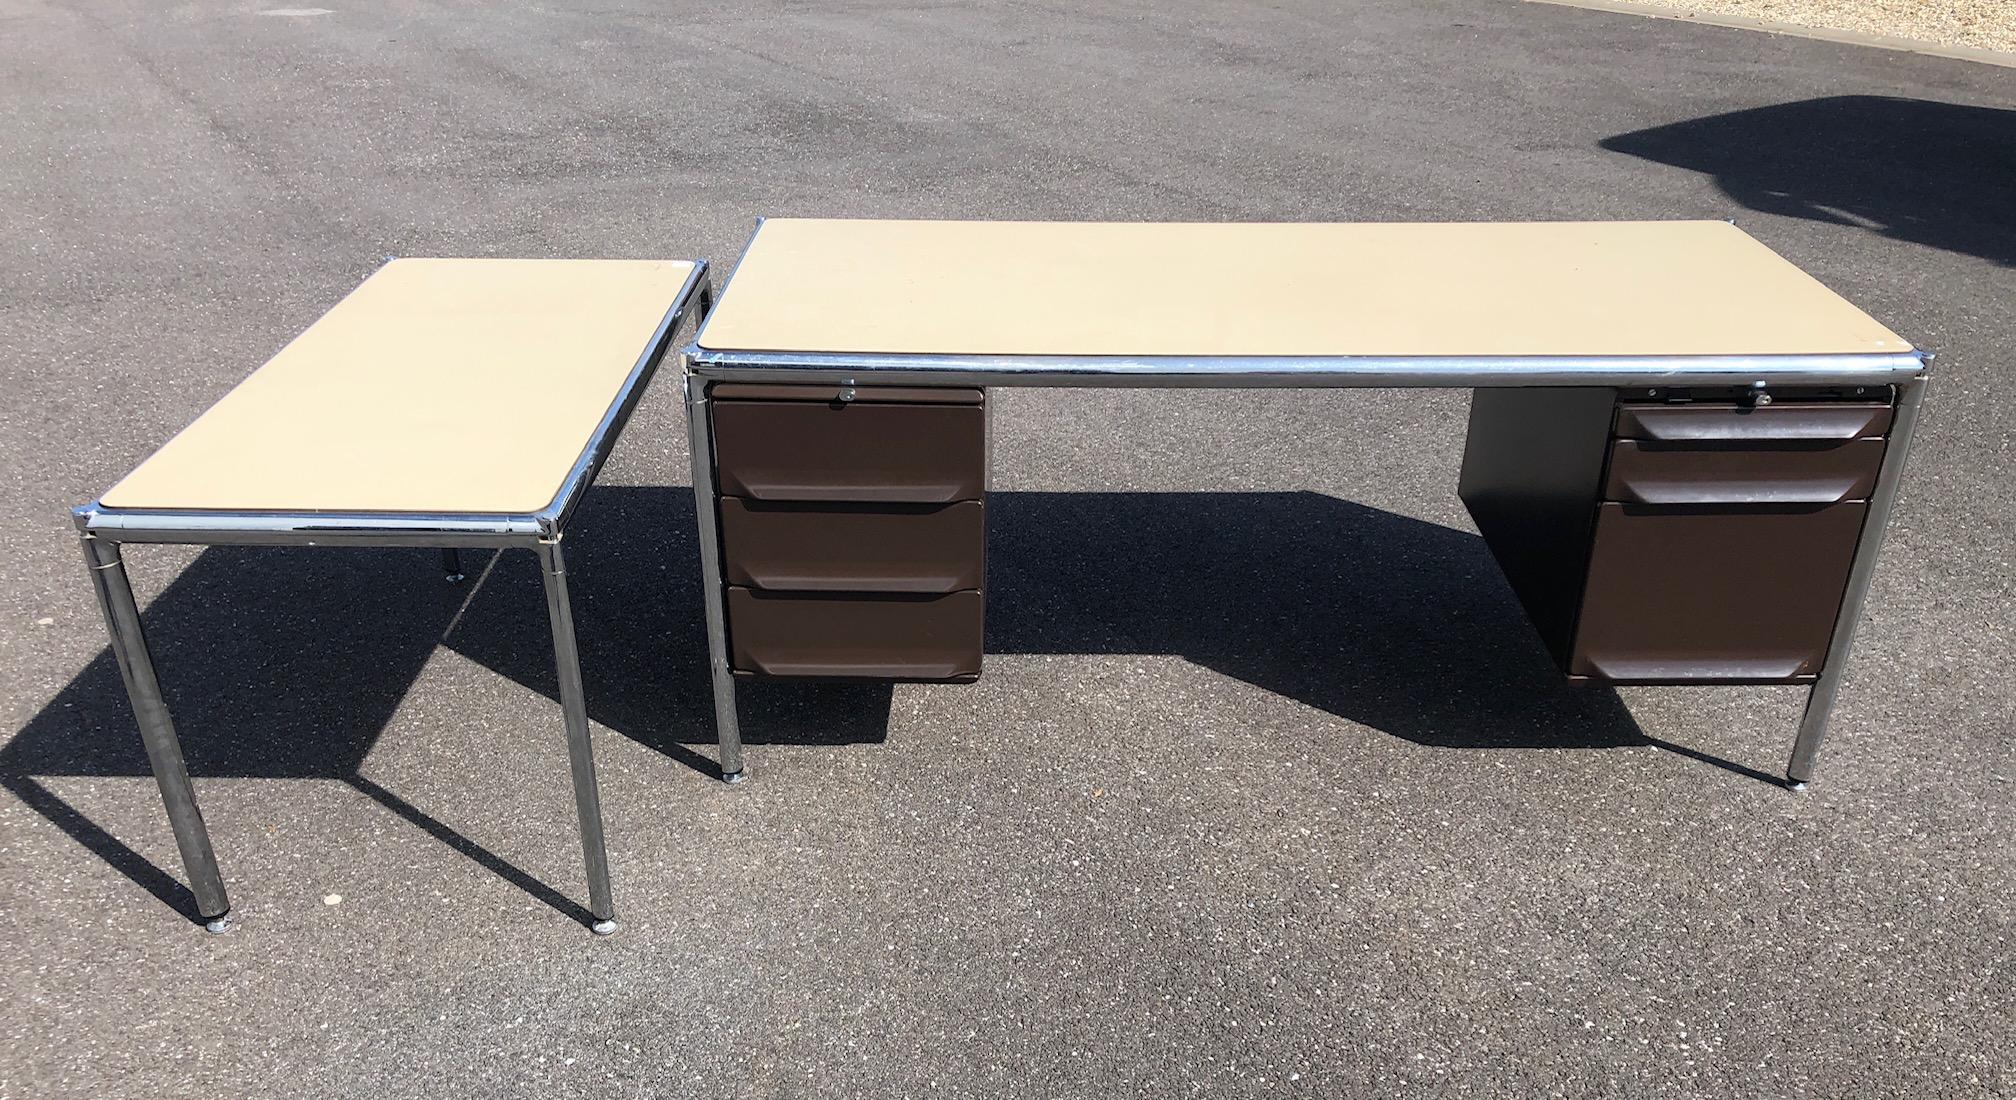 Set of a desk and its matching table in chrome, lacquered metal and laminated top.
Set of three drawers on each side of the desk
Measures: Large desk 180cm, 80 cm, 75 cm height
Table 120 cm, 60 cm, 65 cm height.